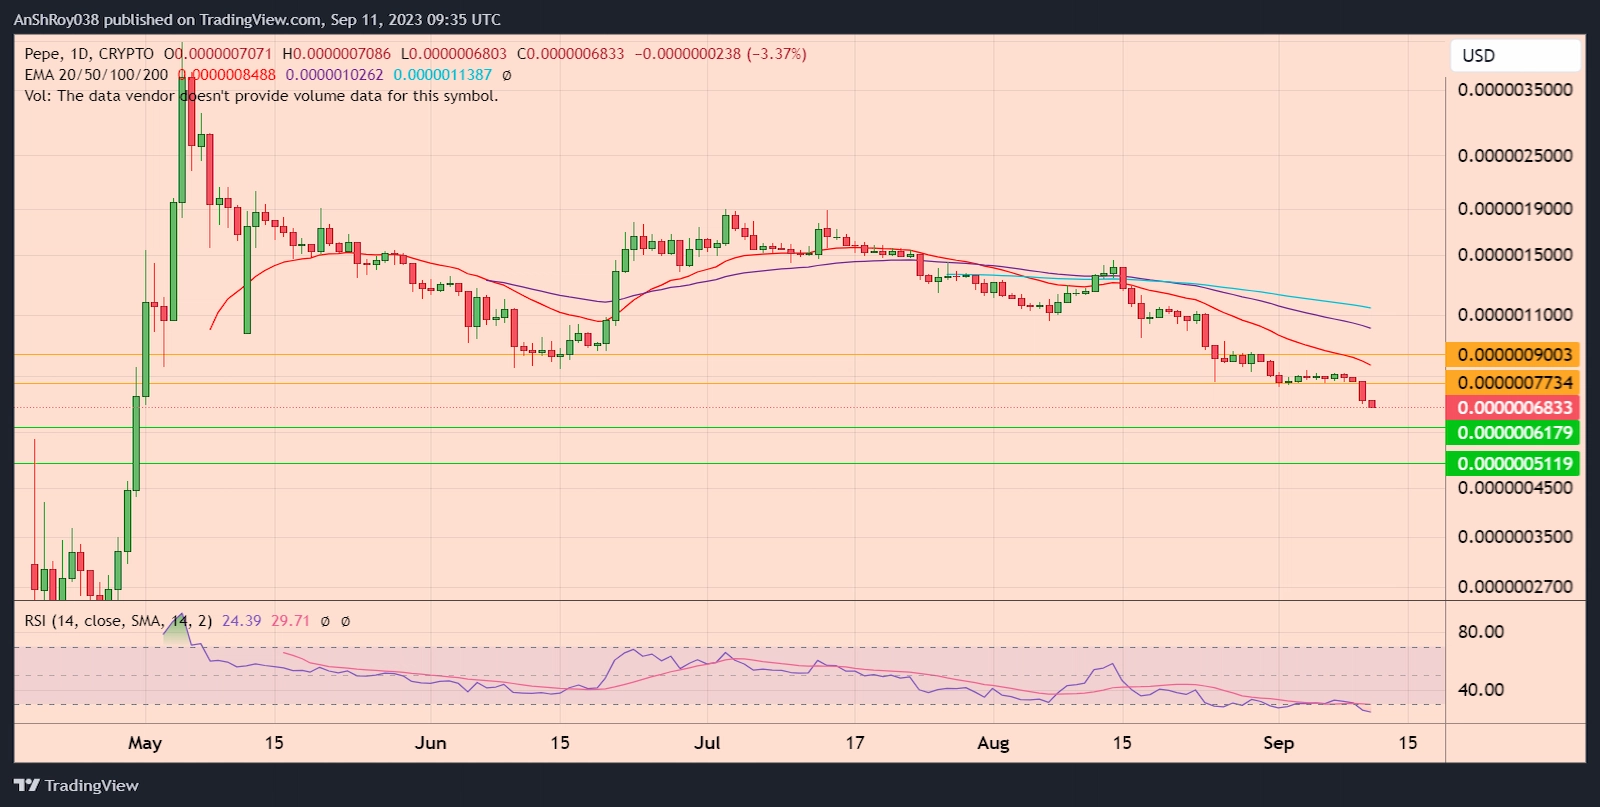 PEPEUSD daily price chart with RSI. 